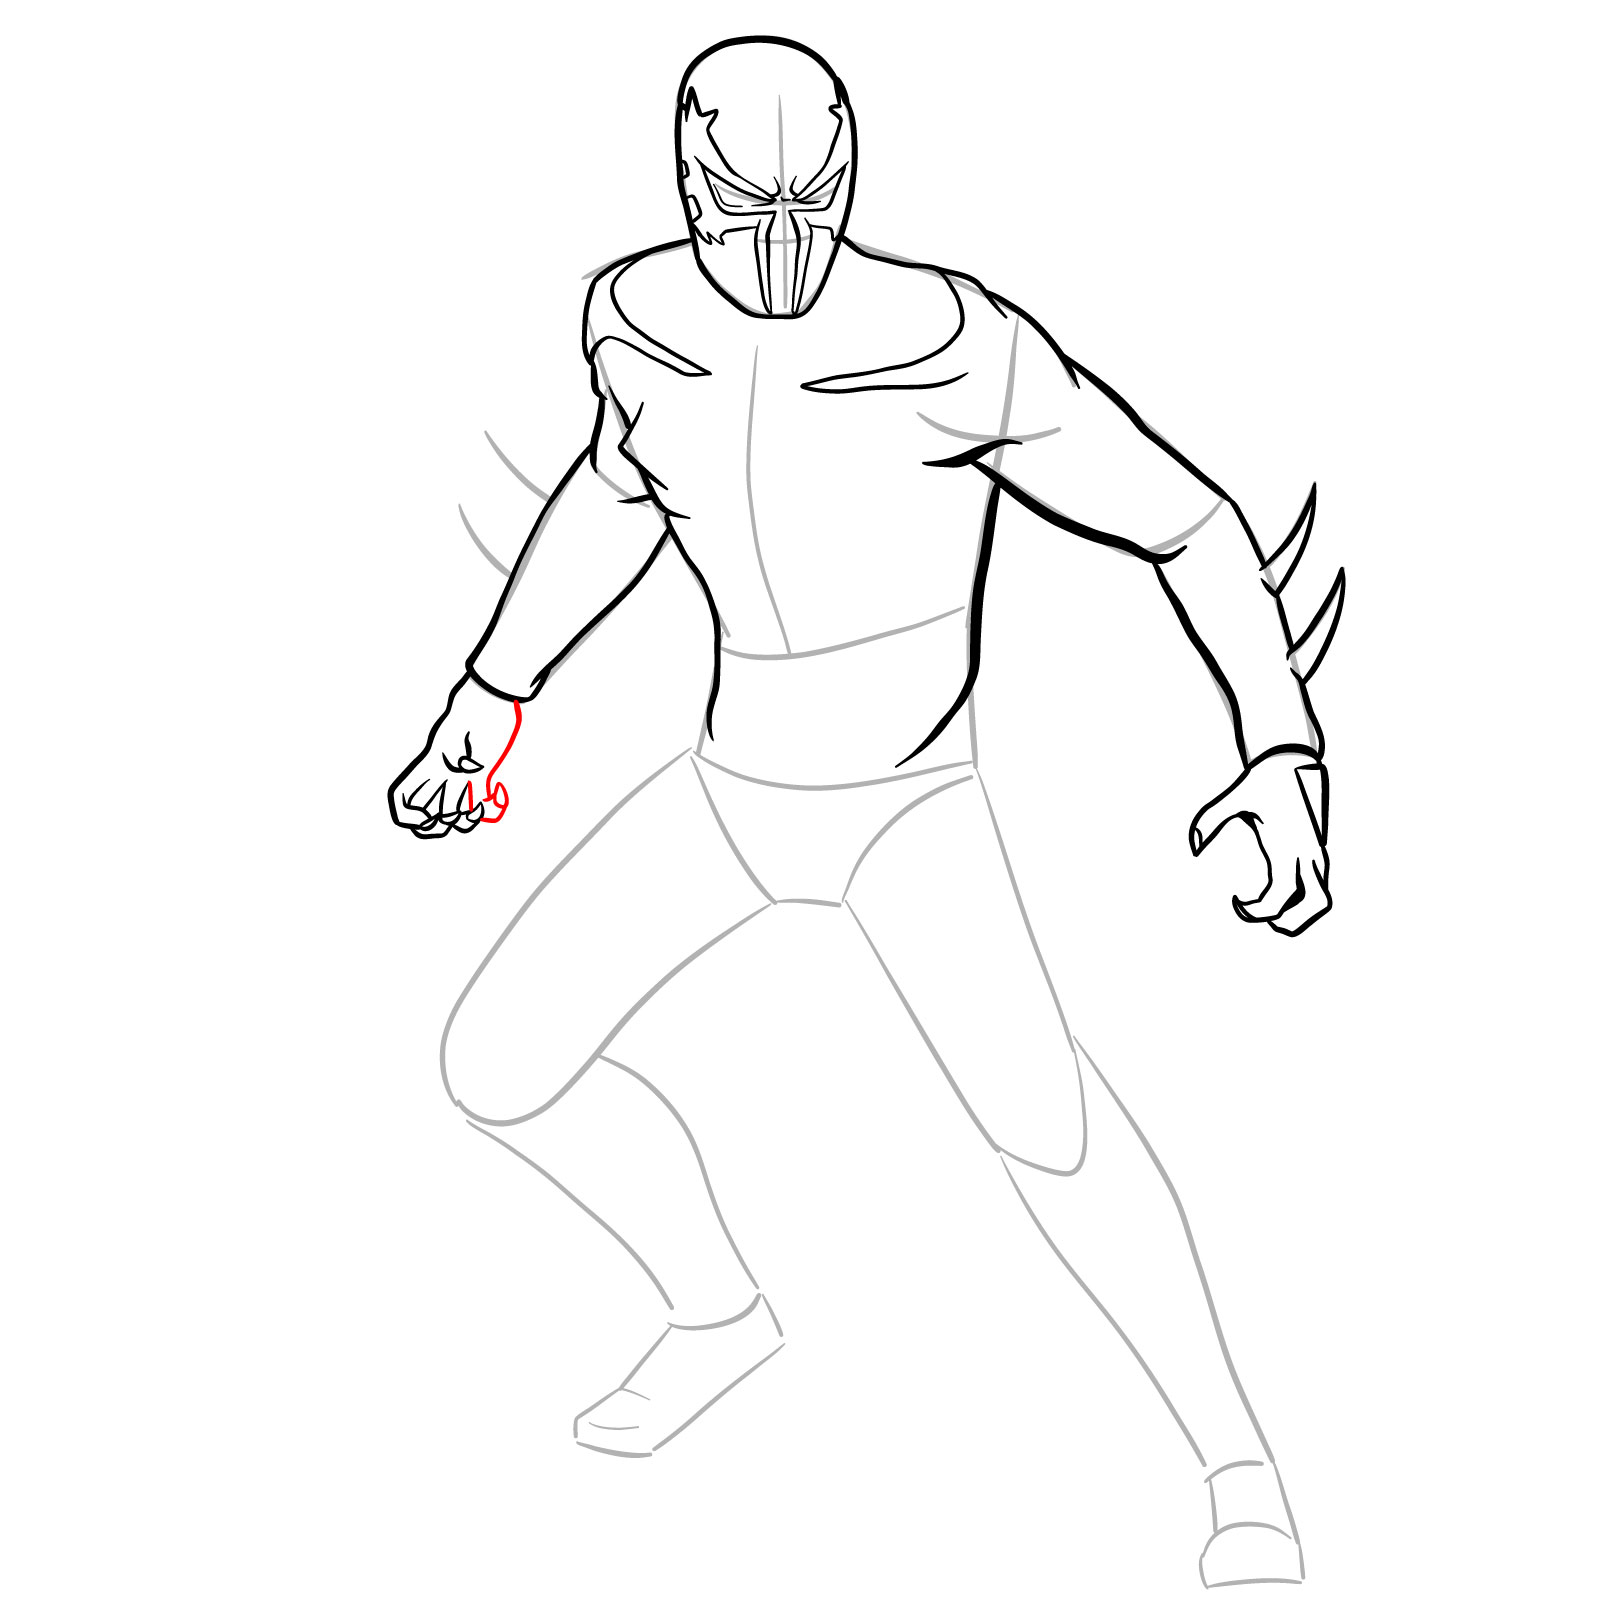 How to draw Spider-Man 2099 - step 23